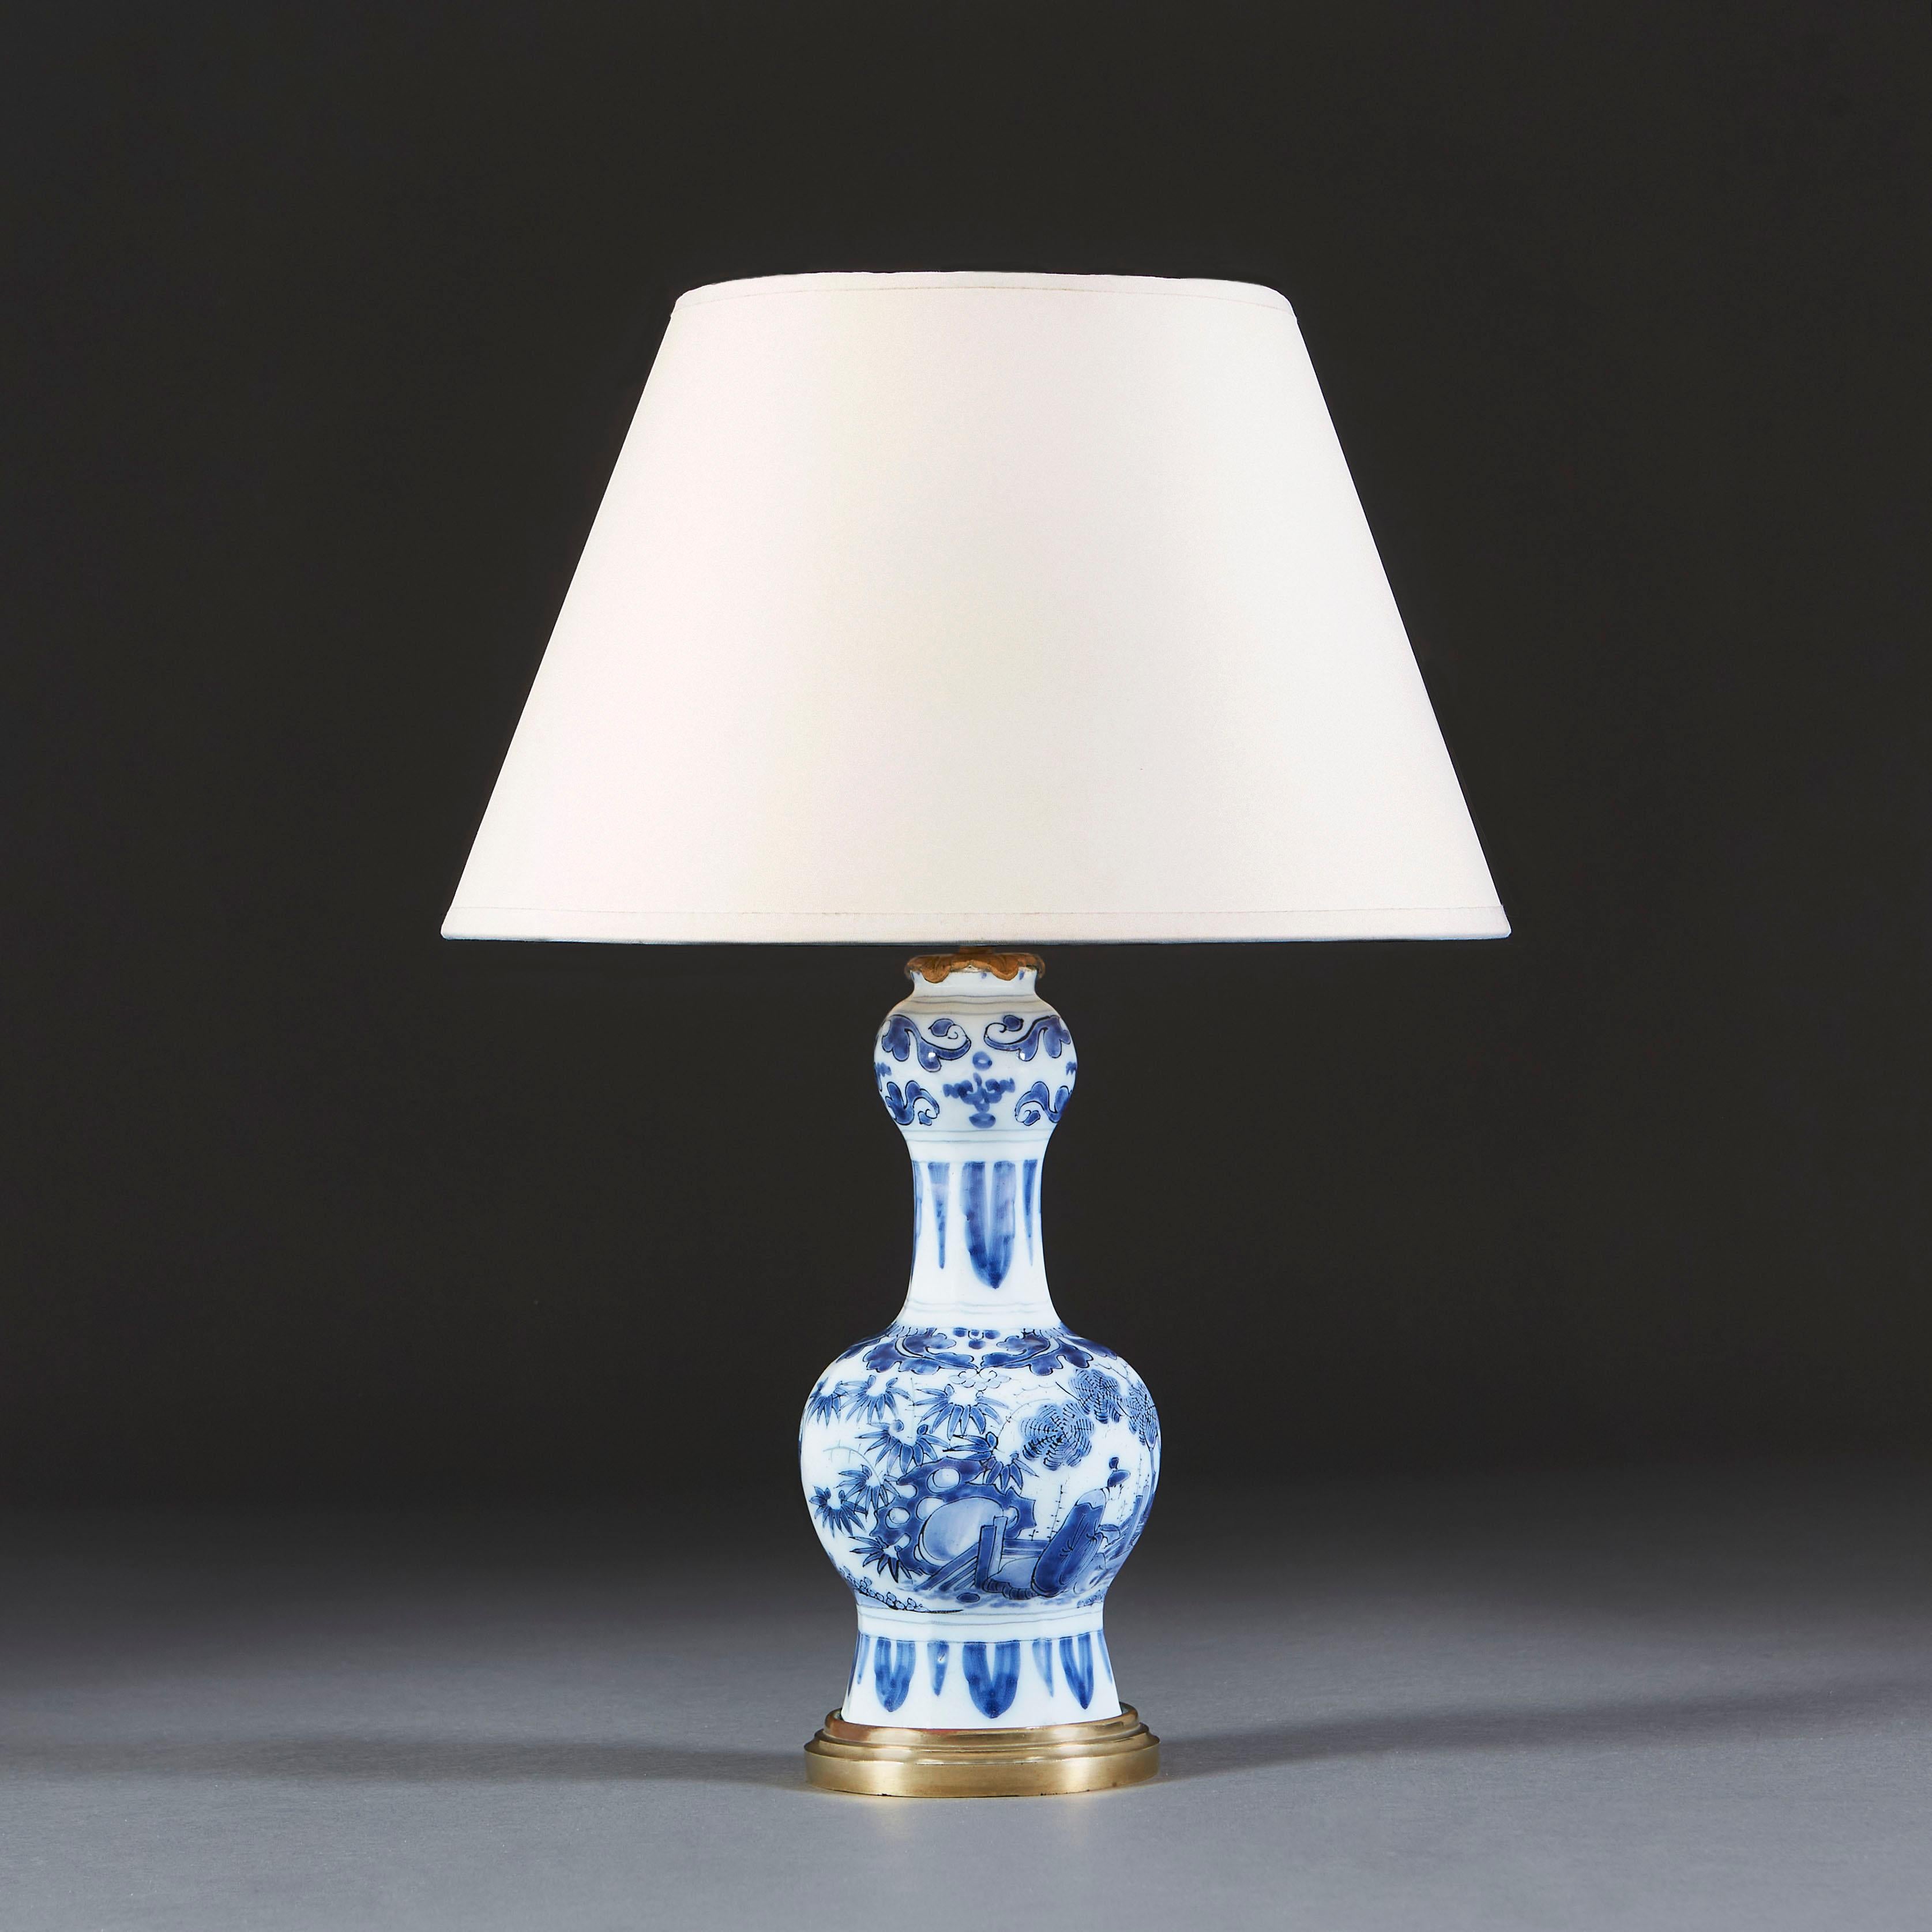 Dutch 19th Century Blue and White Delft Vase as a Table Lamp with Brass Base